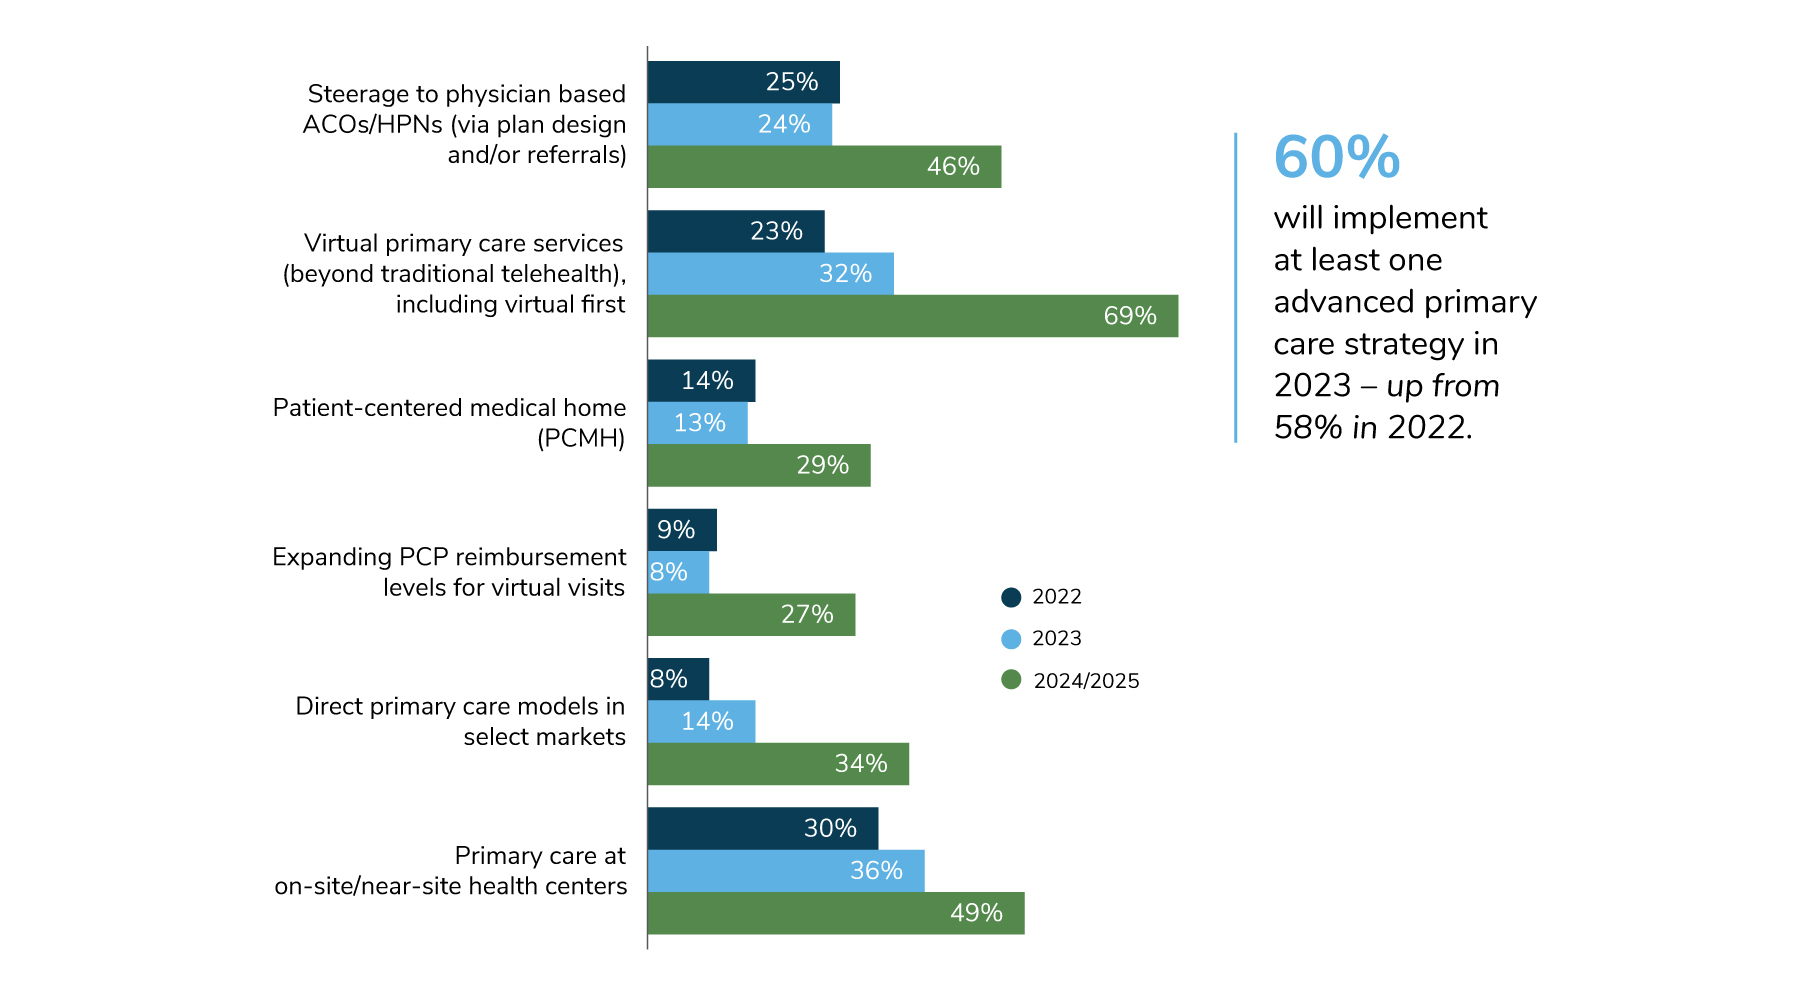 In 2023, 36% of employers will offer primary care at on-site/near-site health centers, and 32% will offer virtual primary care services.